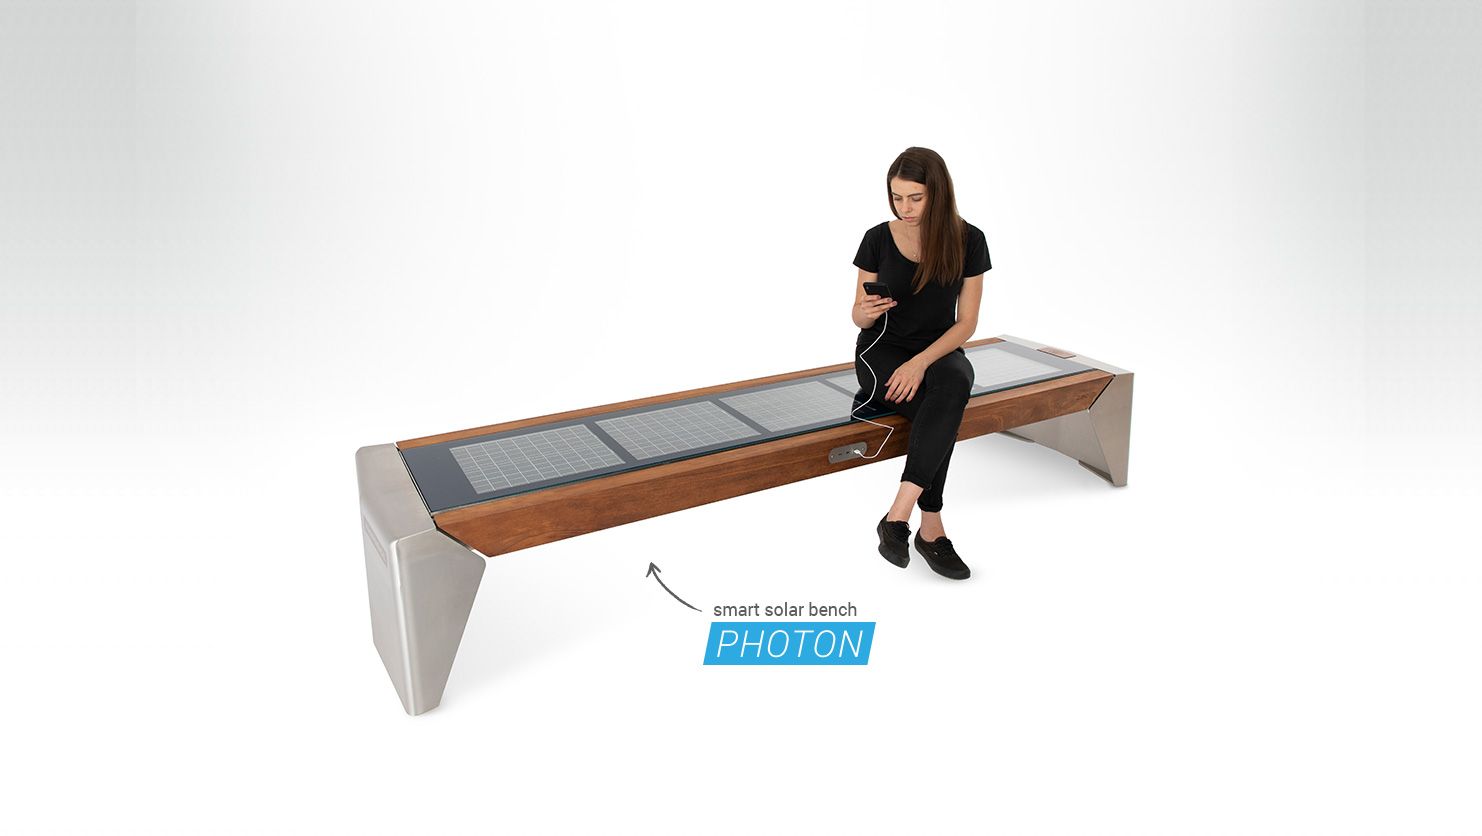 Public solar bench made of stainless steel, exotic wood and tempered glass, selfpowered by photovoltaic panels.